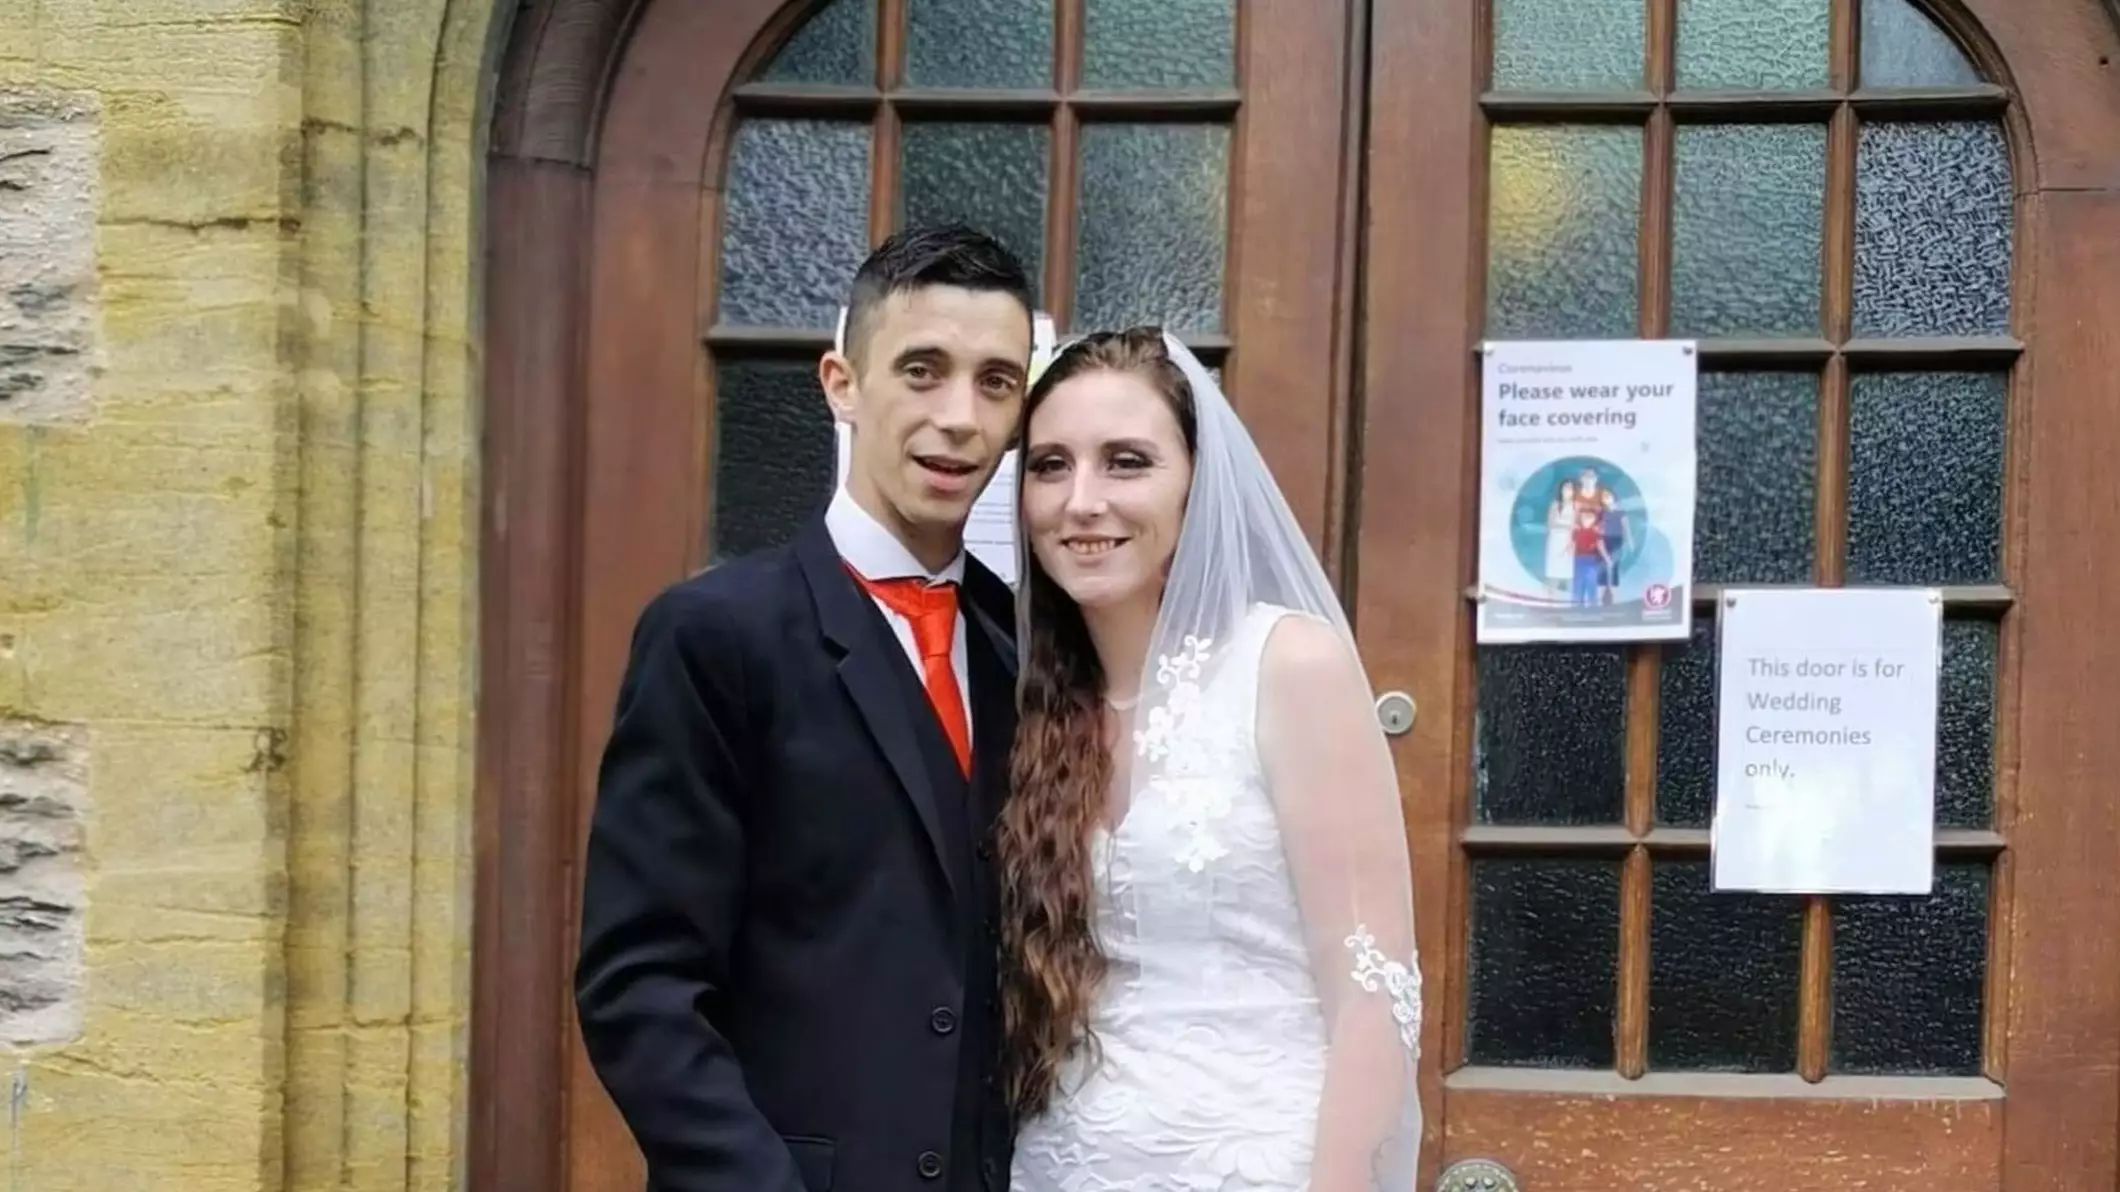 Couple Get Hitched For Just £300 With £10 eBay Dress And Brewers Fayre Meals